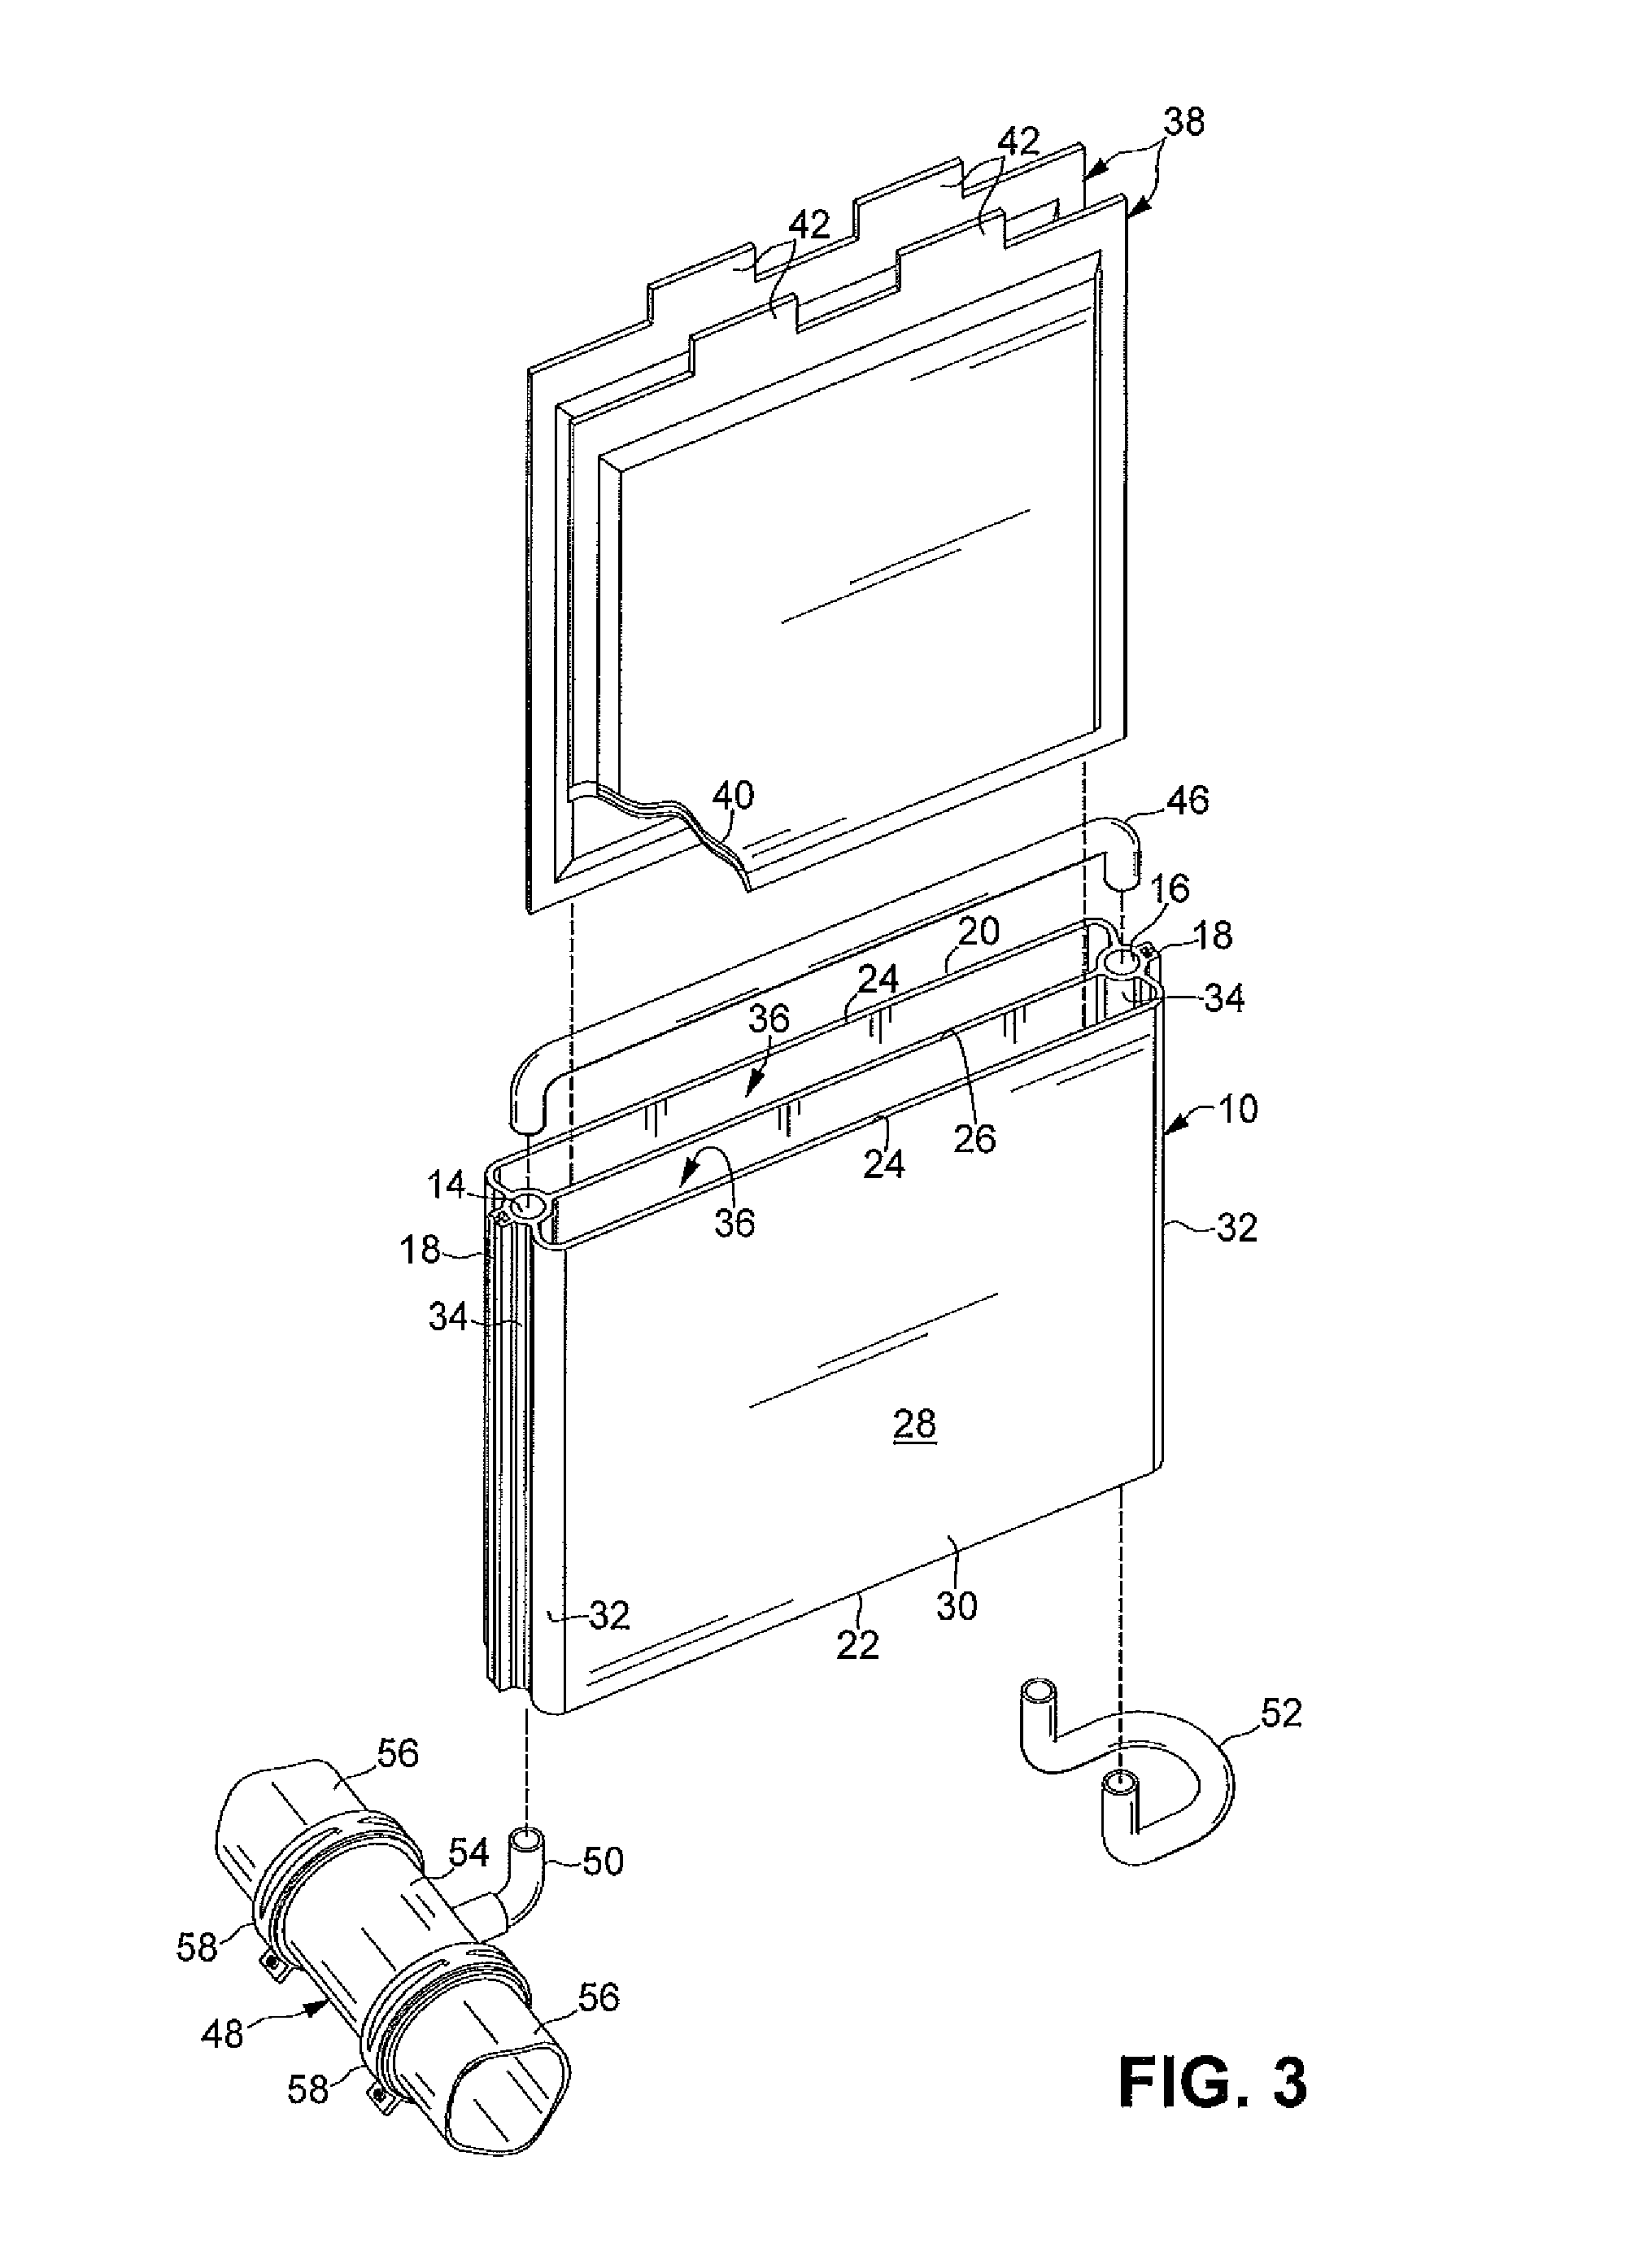 Extruded thermal fin for temperature control of battery cells